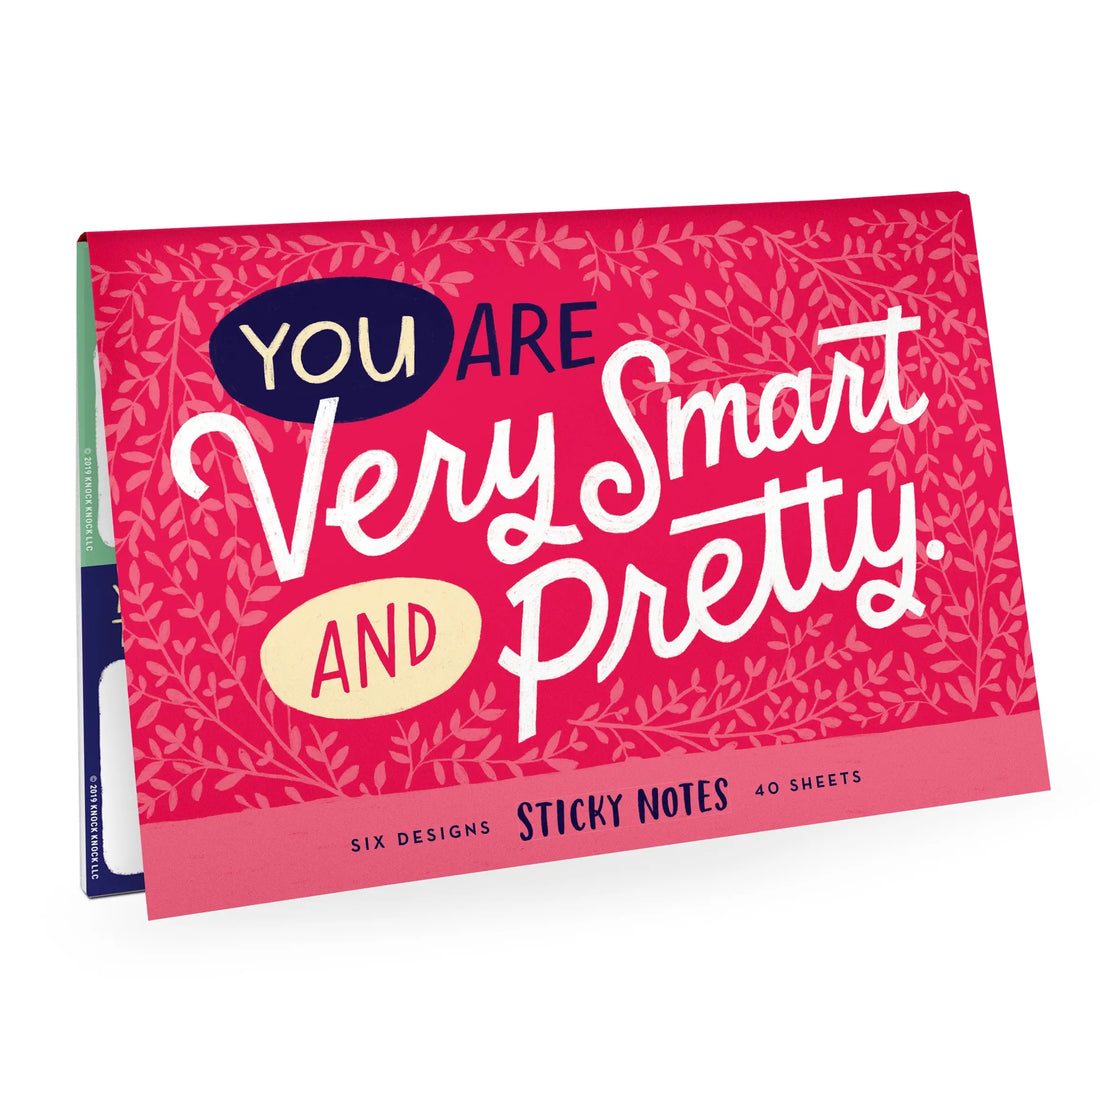 You Are Very Smart and Pretty Sticky Notes